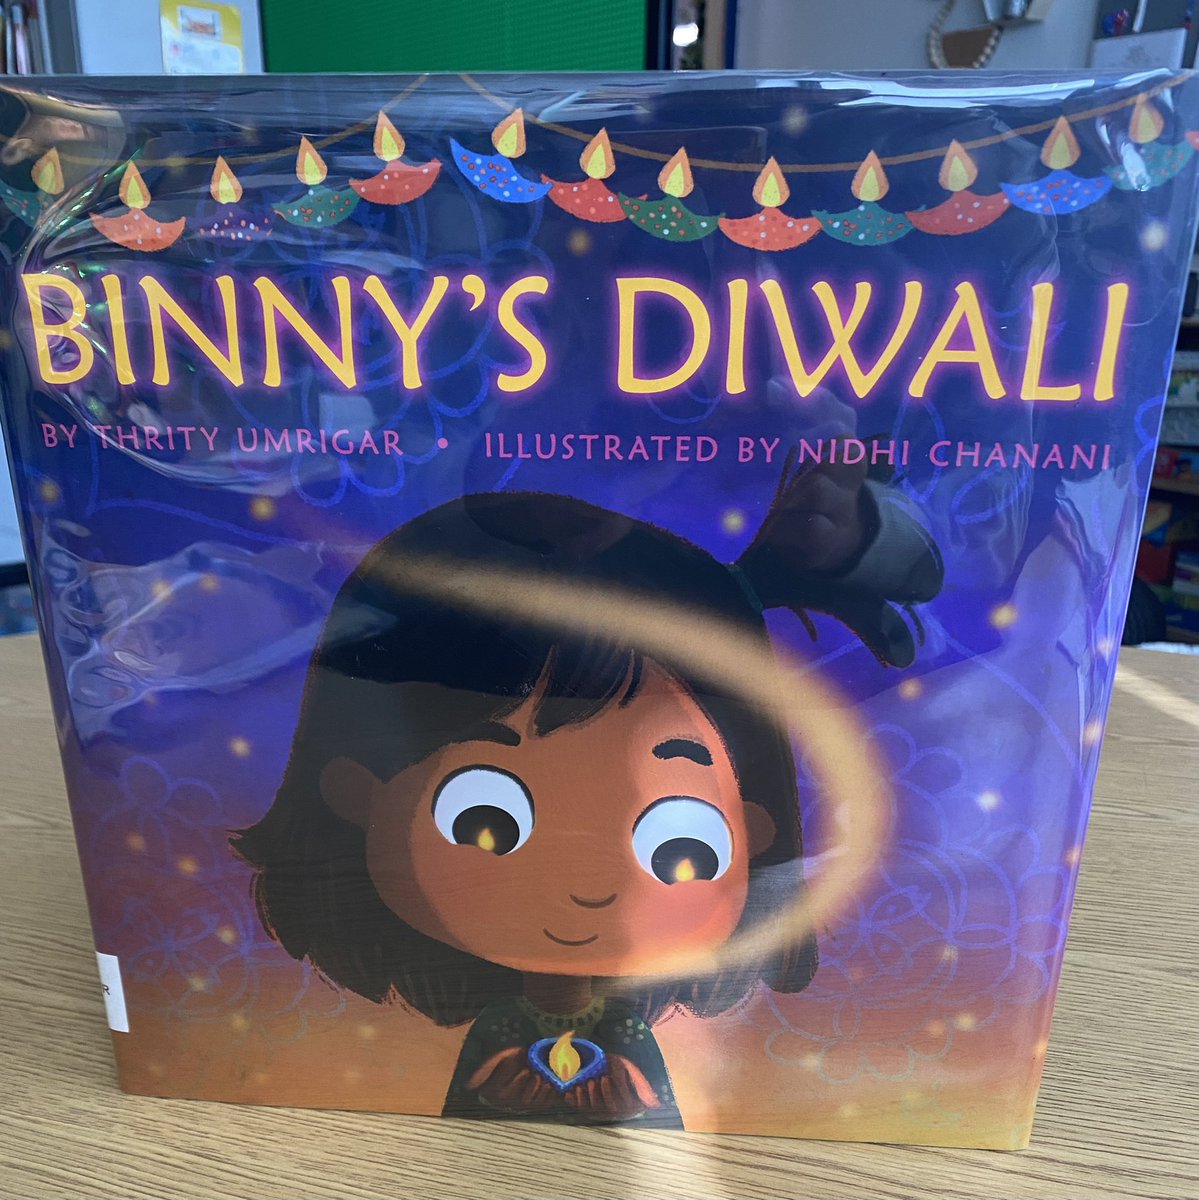 I loved sharing this with my Readers today! Diwali reminds us to be good & kind & brave & honest. @MrsPalm1